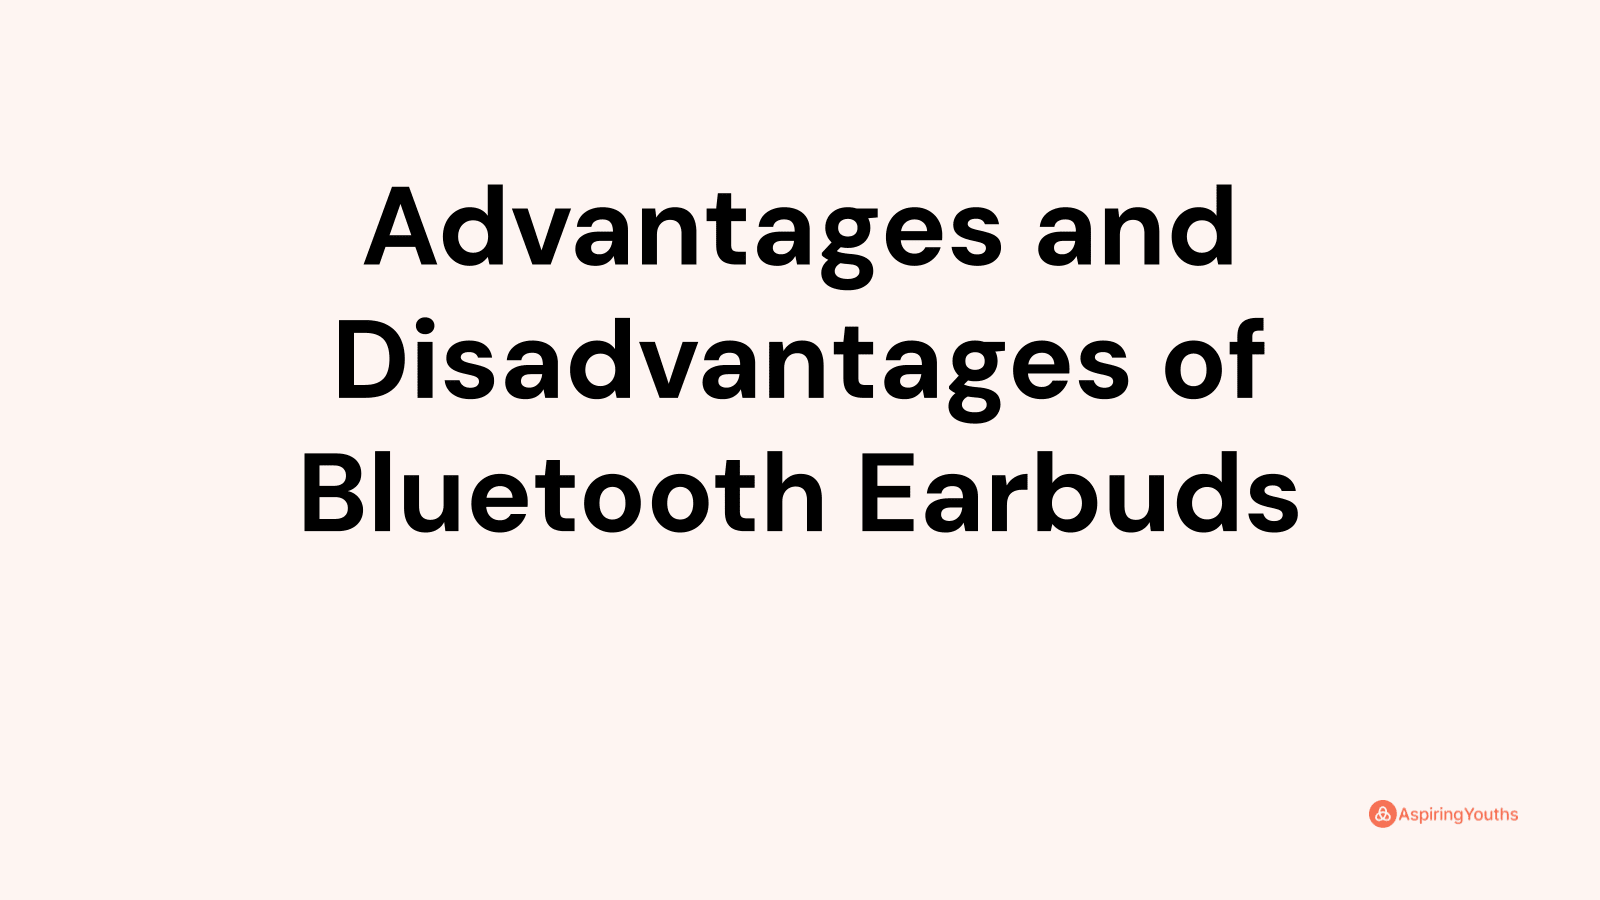 Advantages and disadvantages of Bluetooth Earbuds